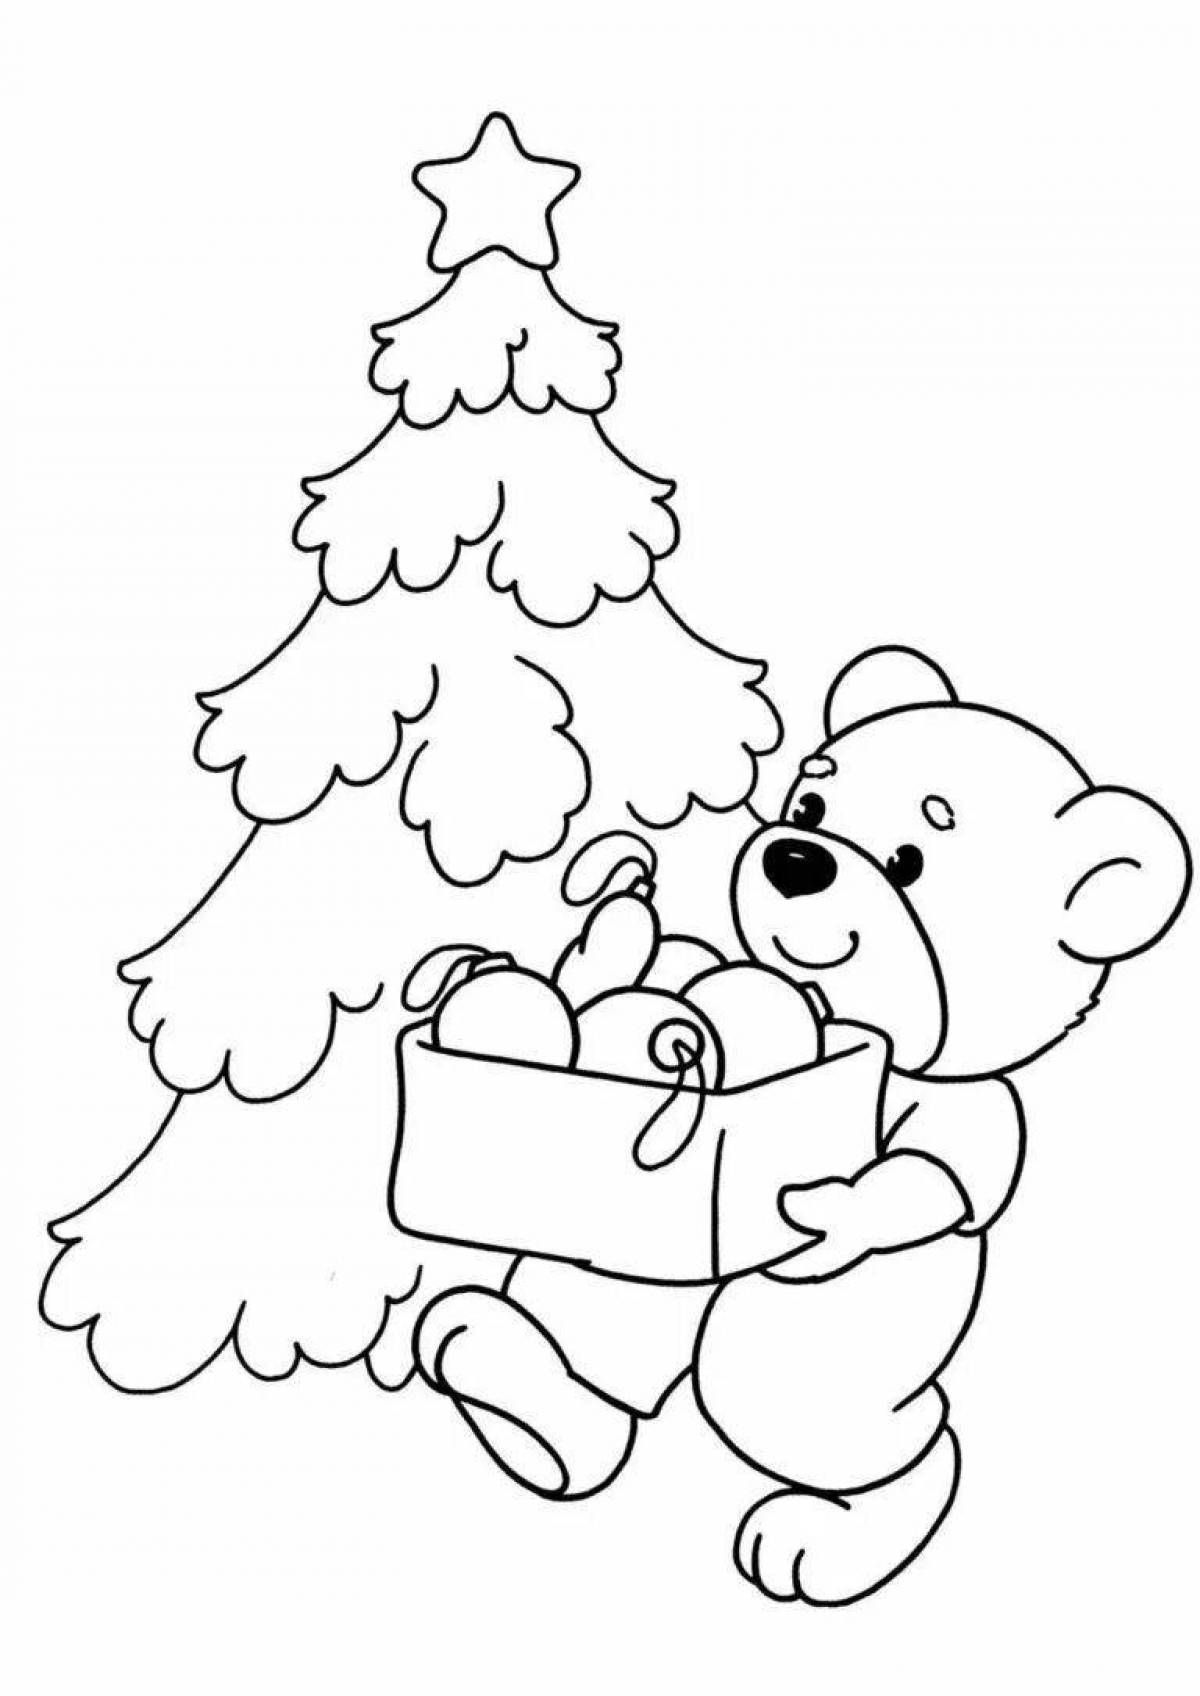 Festive Christmas coloring book for 3-4 year olds